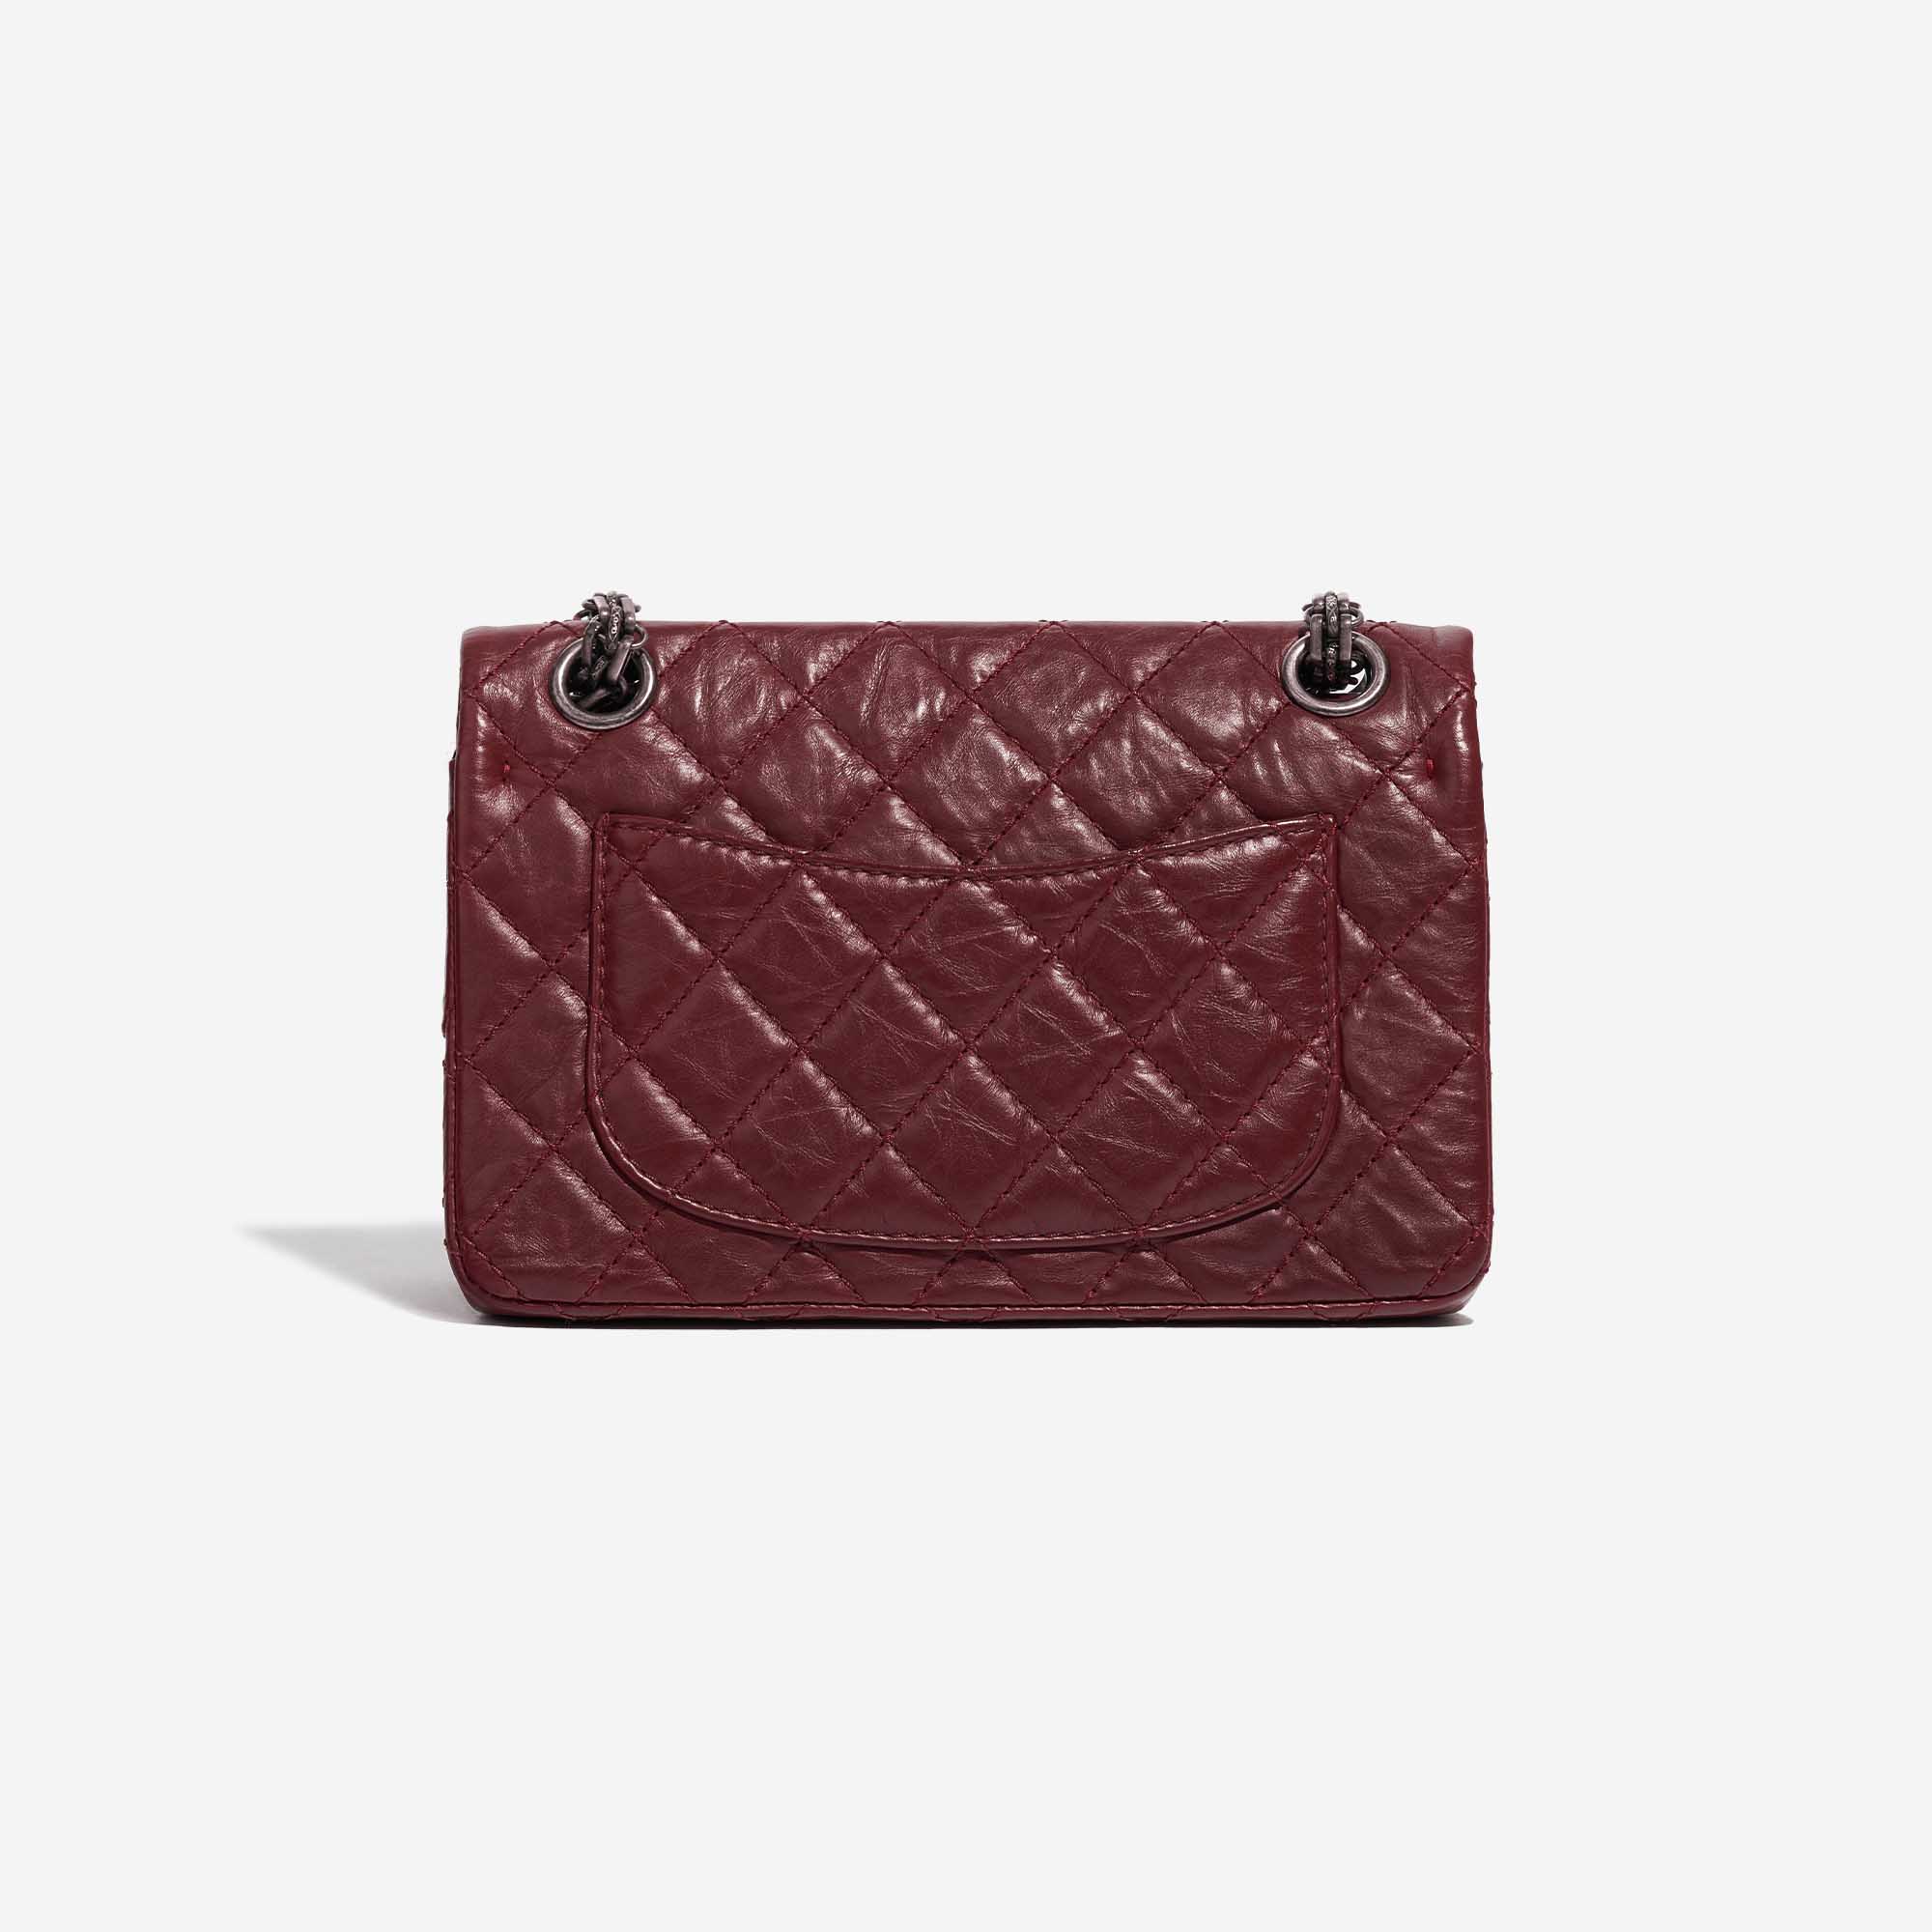 Chanel Black Quilted Caviar Leather Mini Reissue 224 Flap Bag Chanel